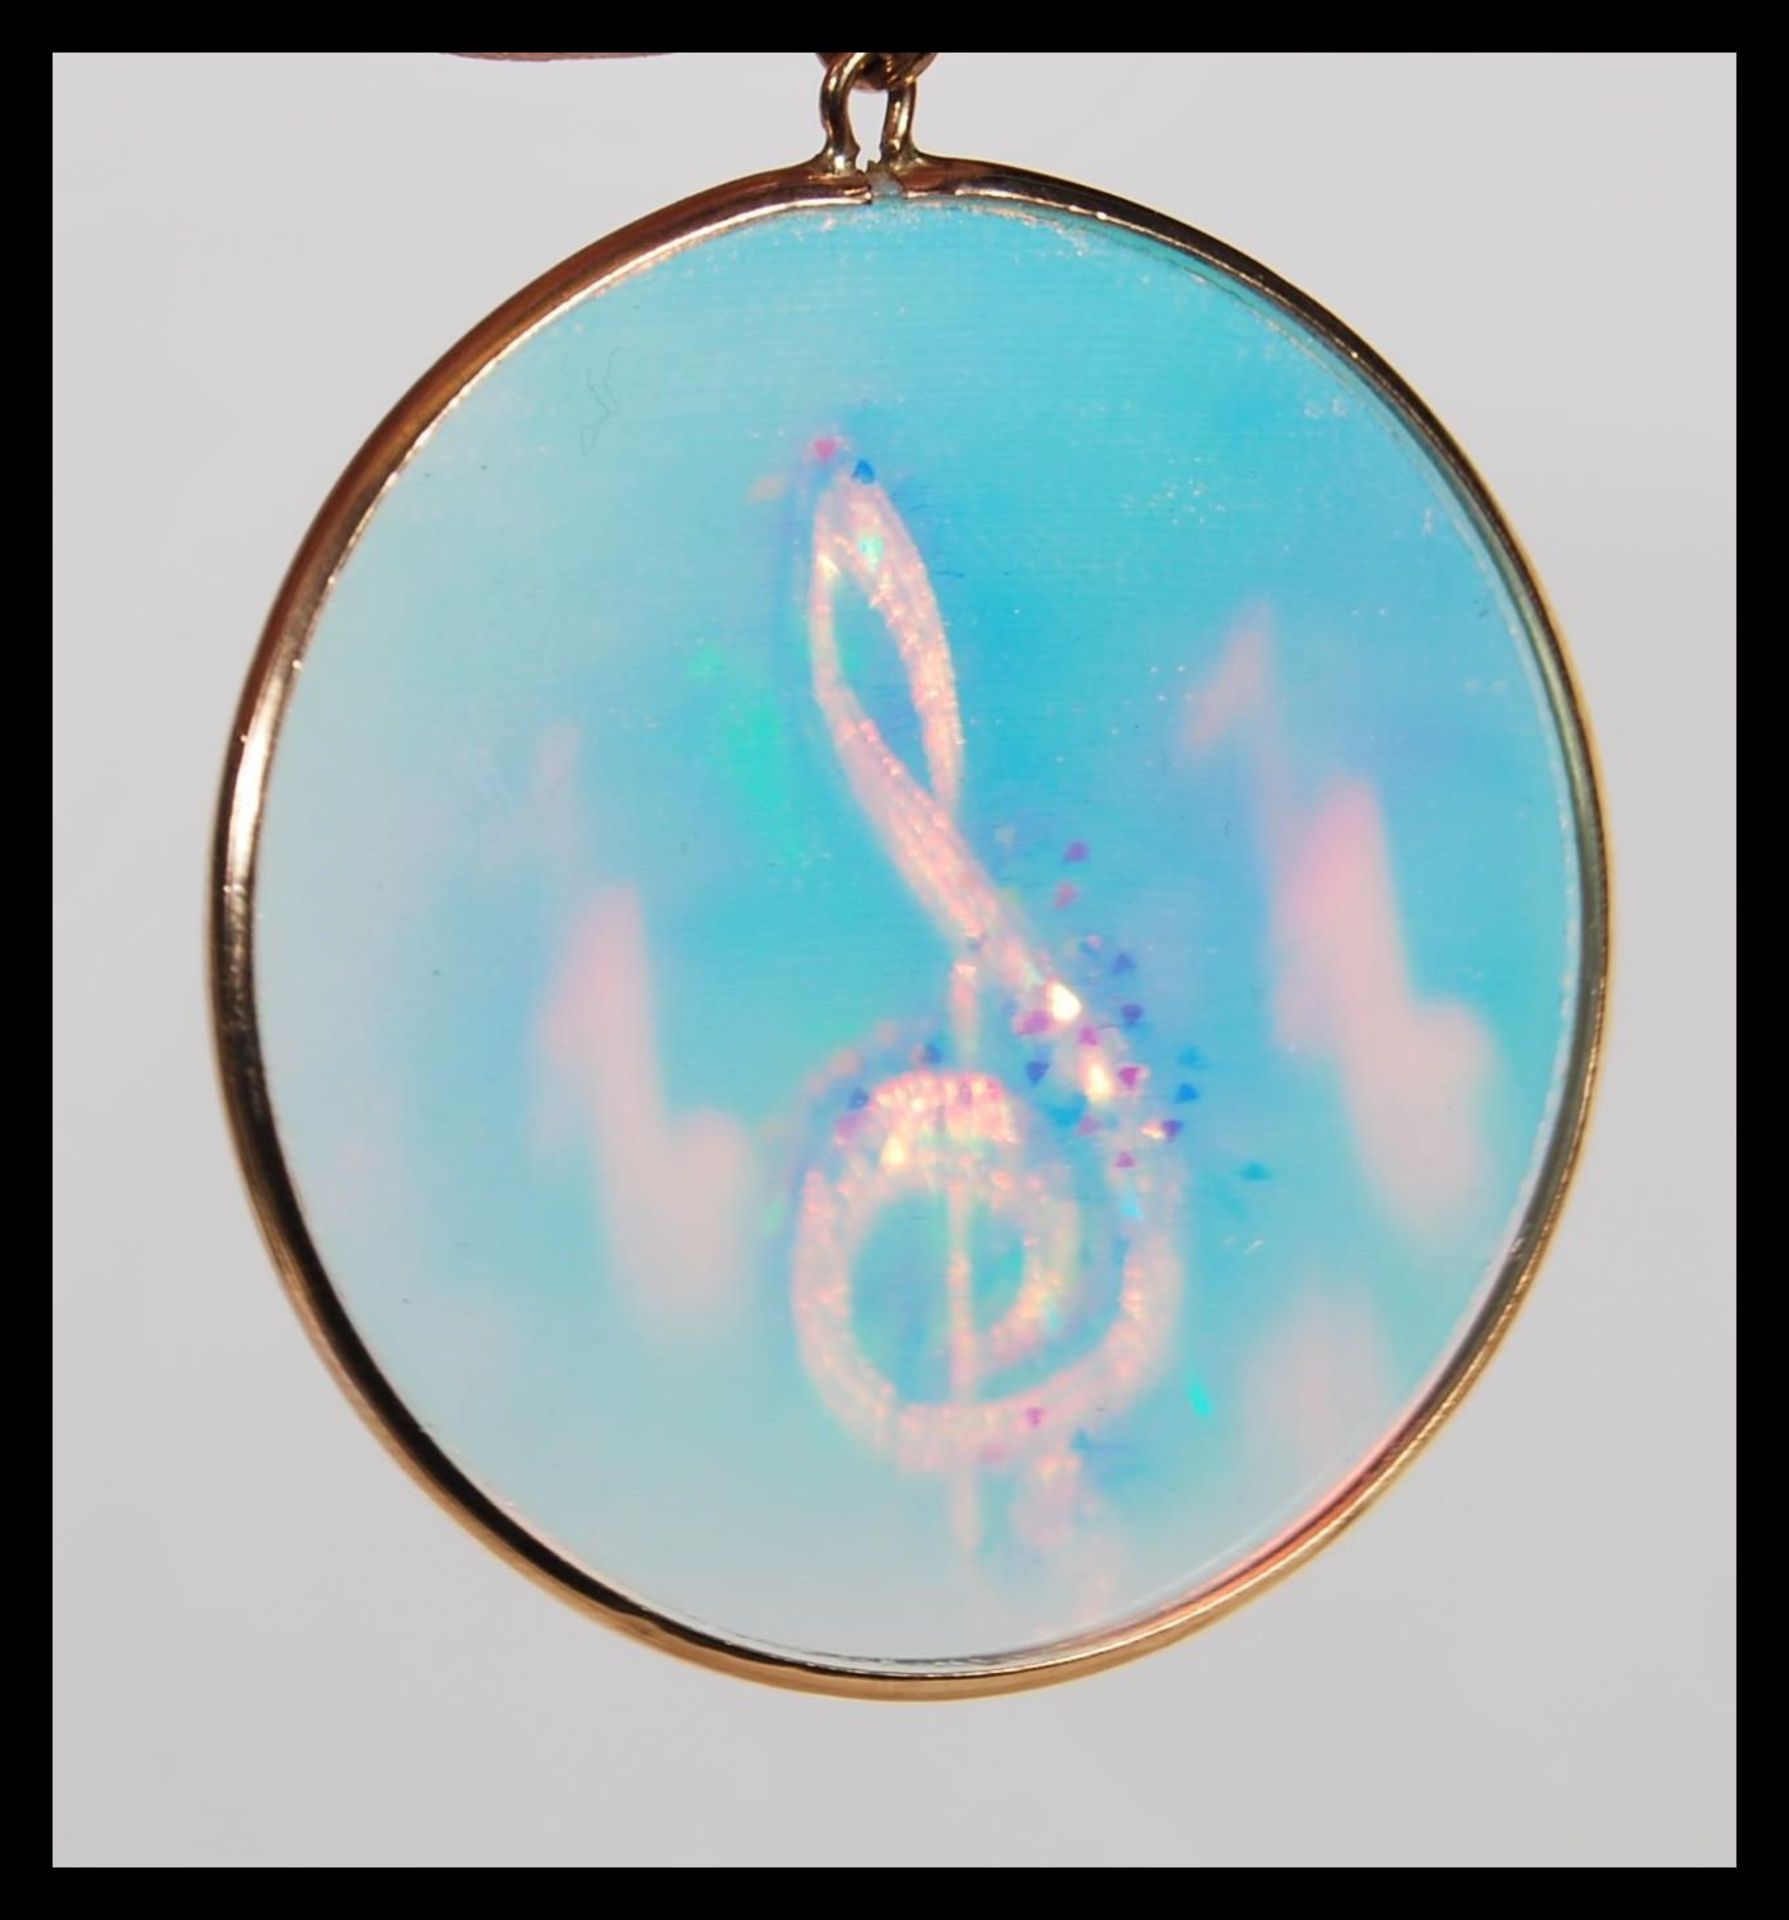 A 9ct gold roundel pendant inset with hologram of musical notes together with a 9ct chain.  The